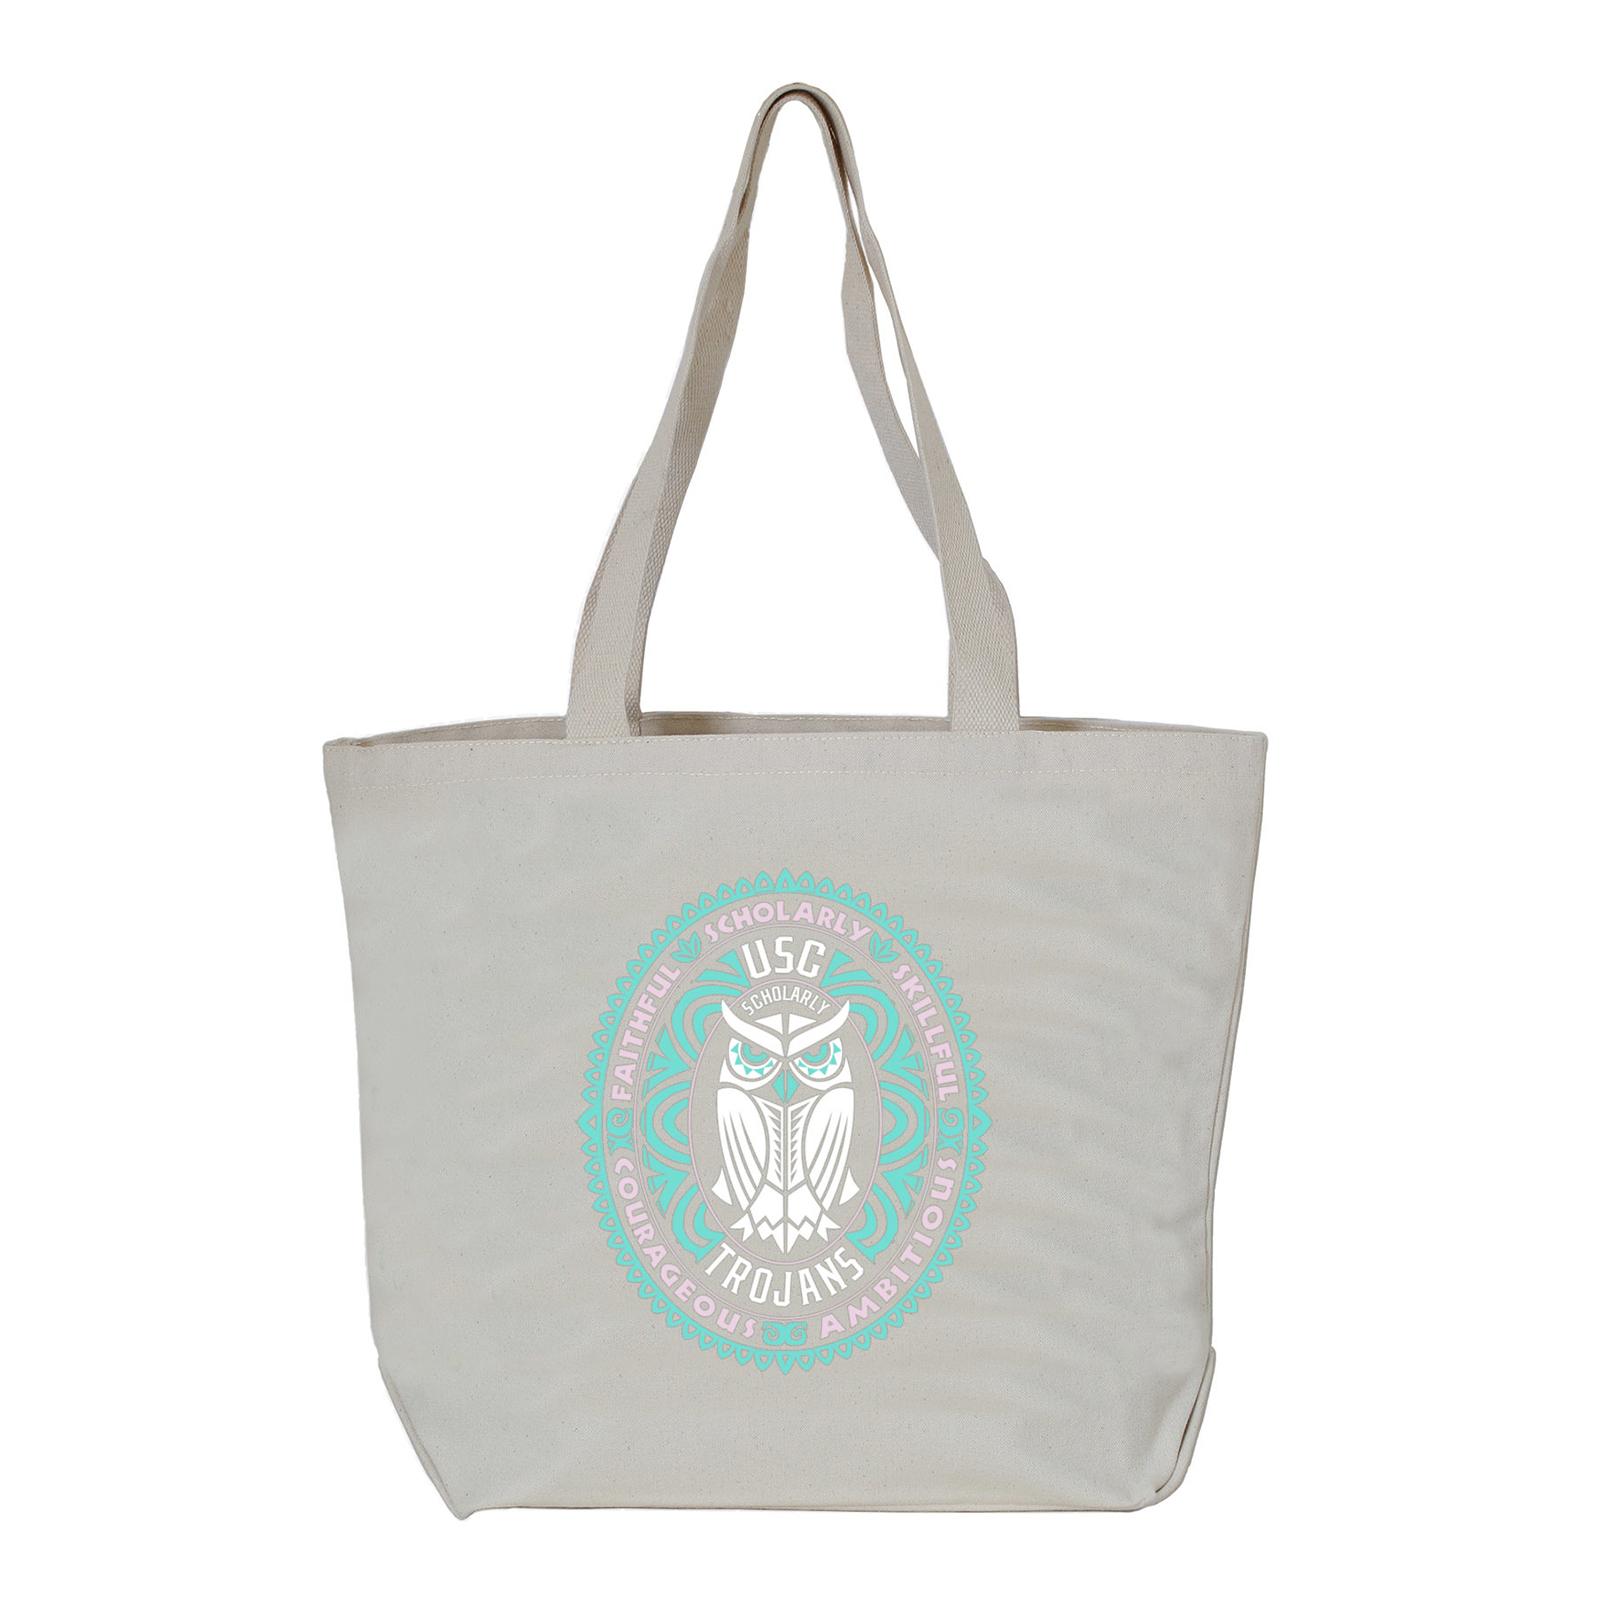 USC Trojans Scholarly Tote by Spirit image01